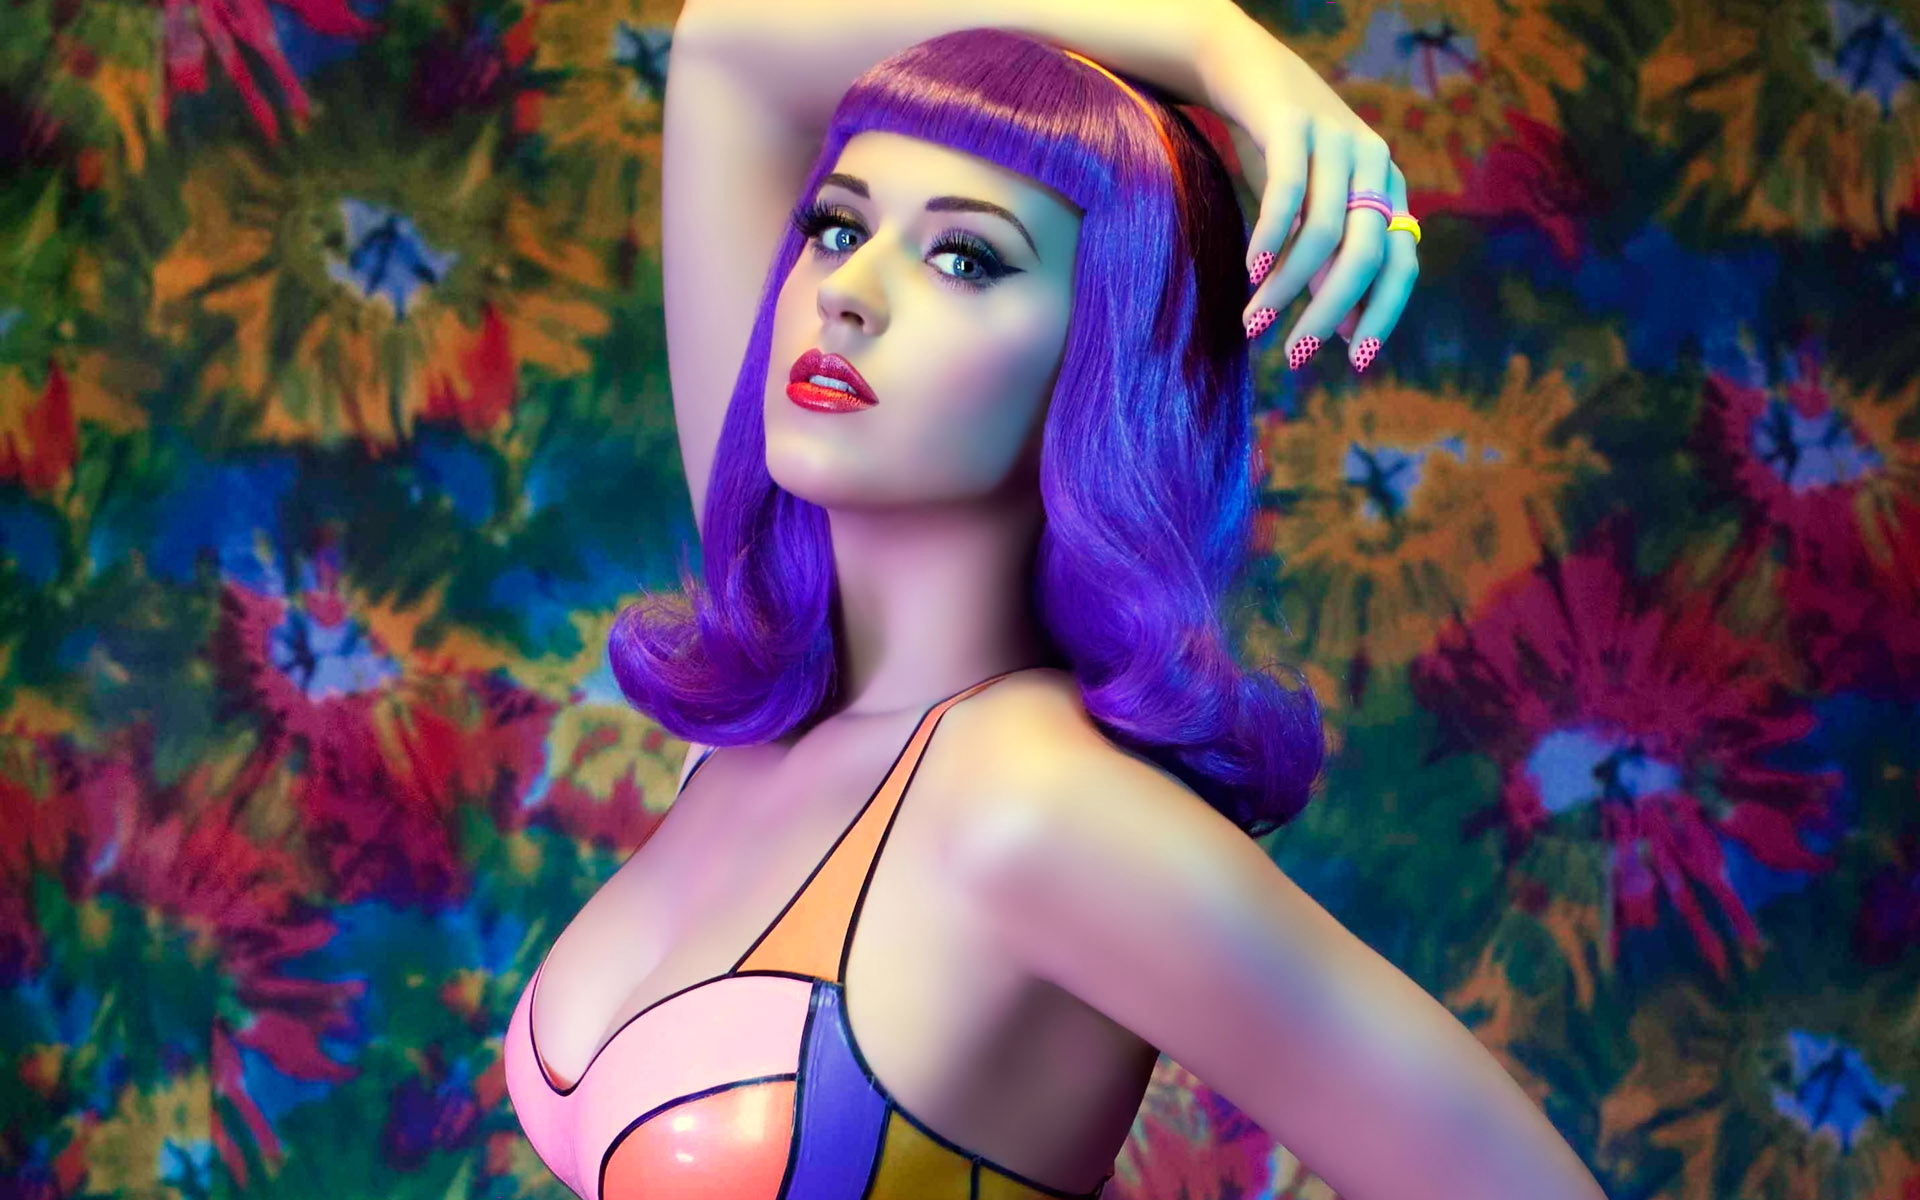 Katy Perry Burns Her Hair In The Name Of Her New Single ‘Roar’